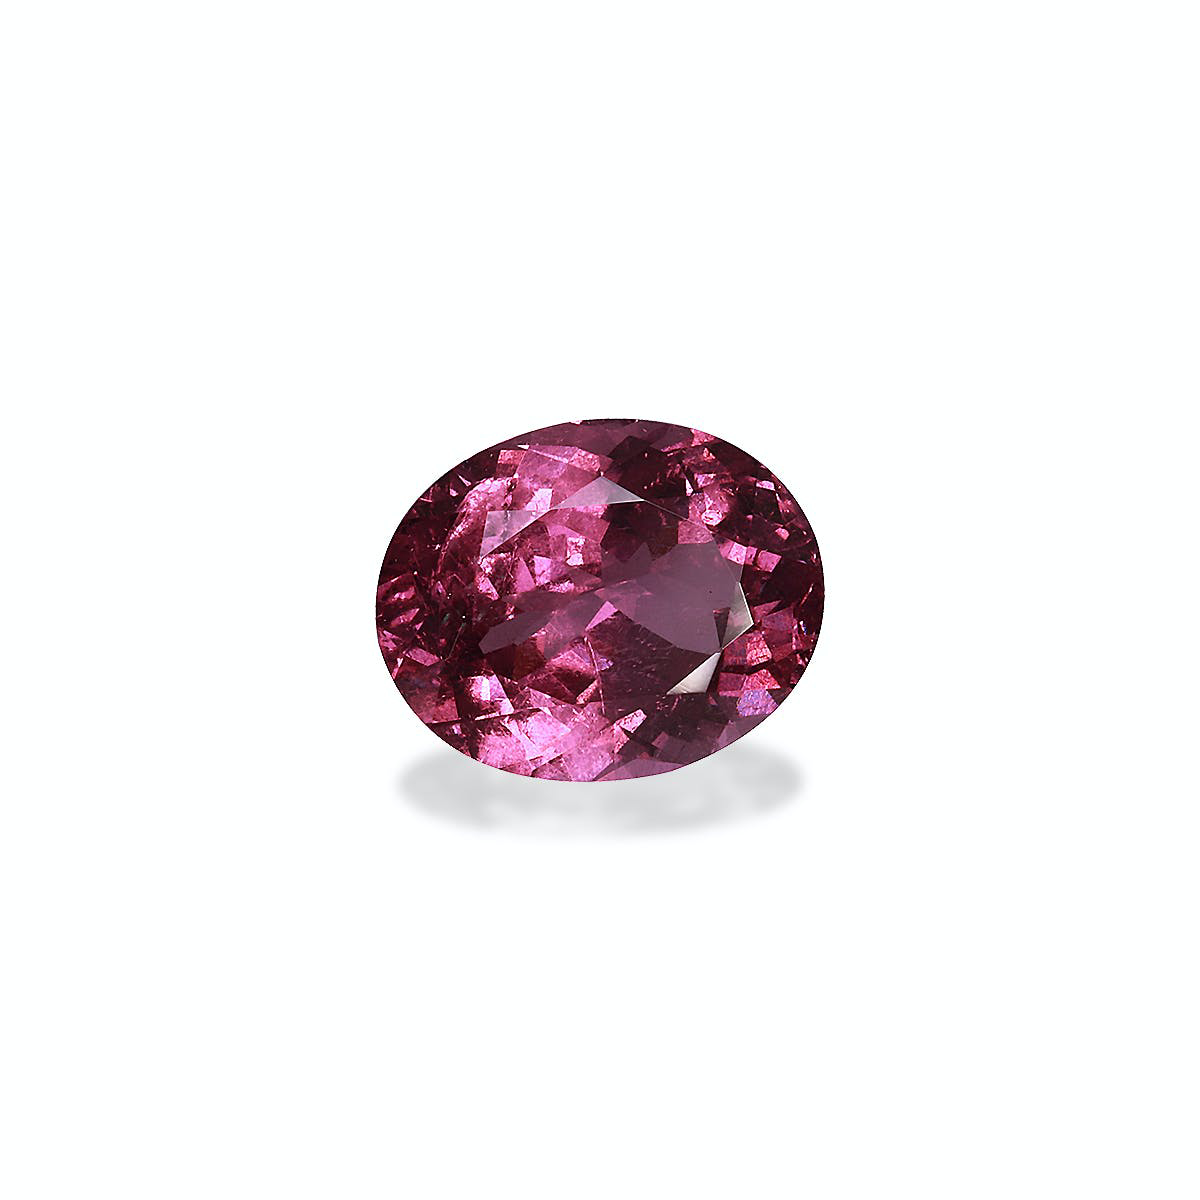 Picture of Fuscia Pink Spinel 6.04ct - 12x10mm (SP0060)